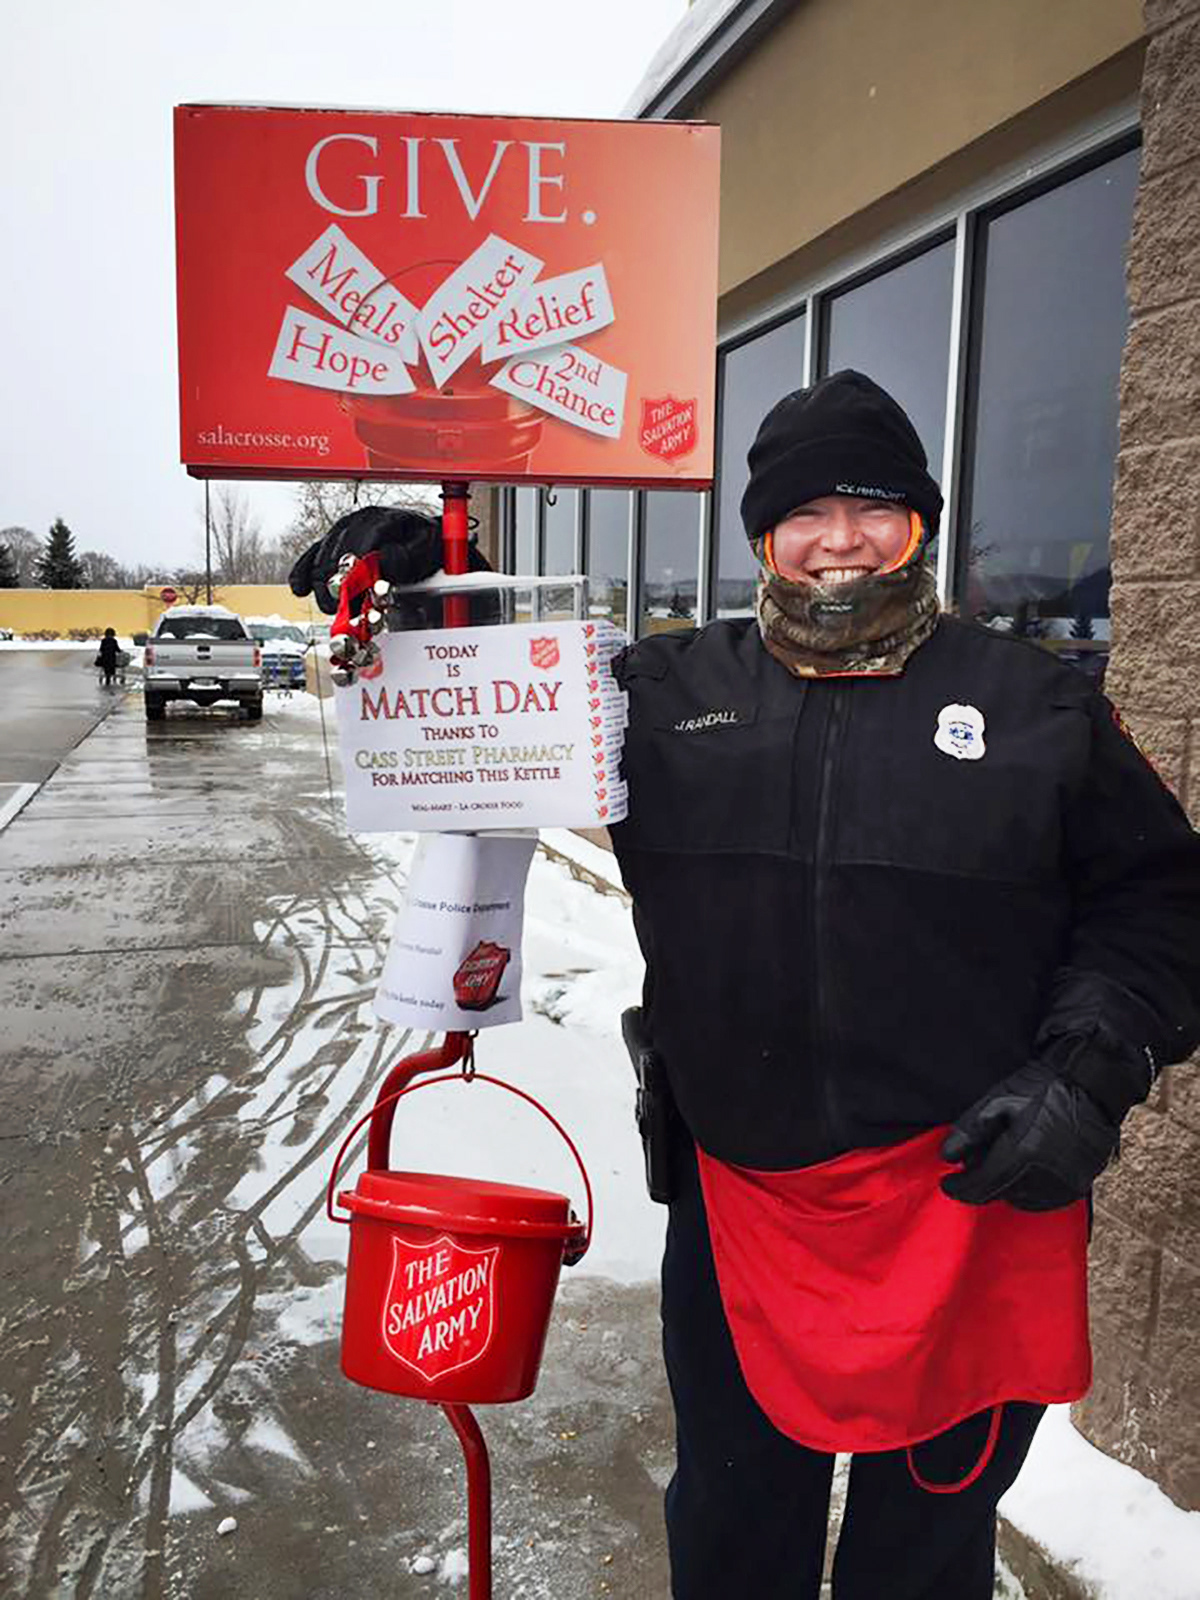 Salvation Army red kettle ad campaign red kettle campaign billboard signs Signage Service project give help social needy